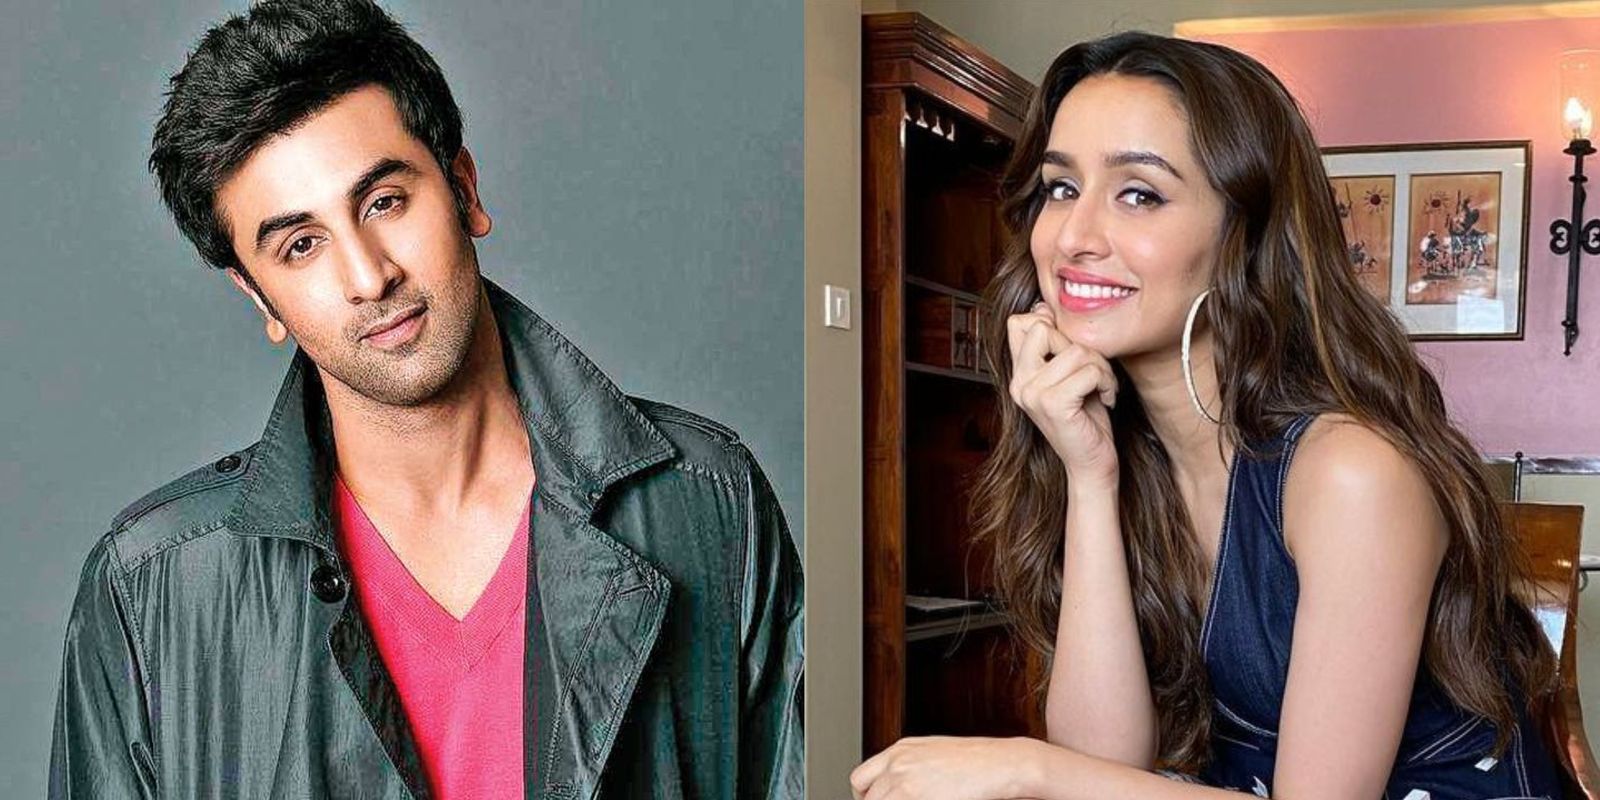 Ranbir Kapoor And Shraddha Kapoor’s Romantic Comedy To Go On Floors This Month In Mumbai?